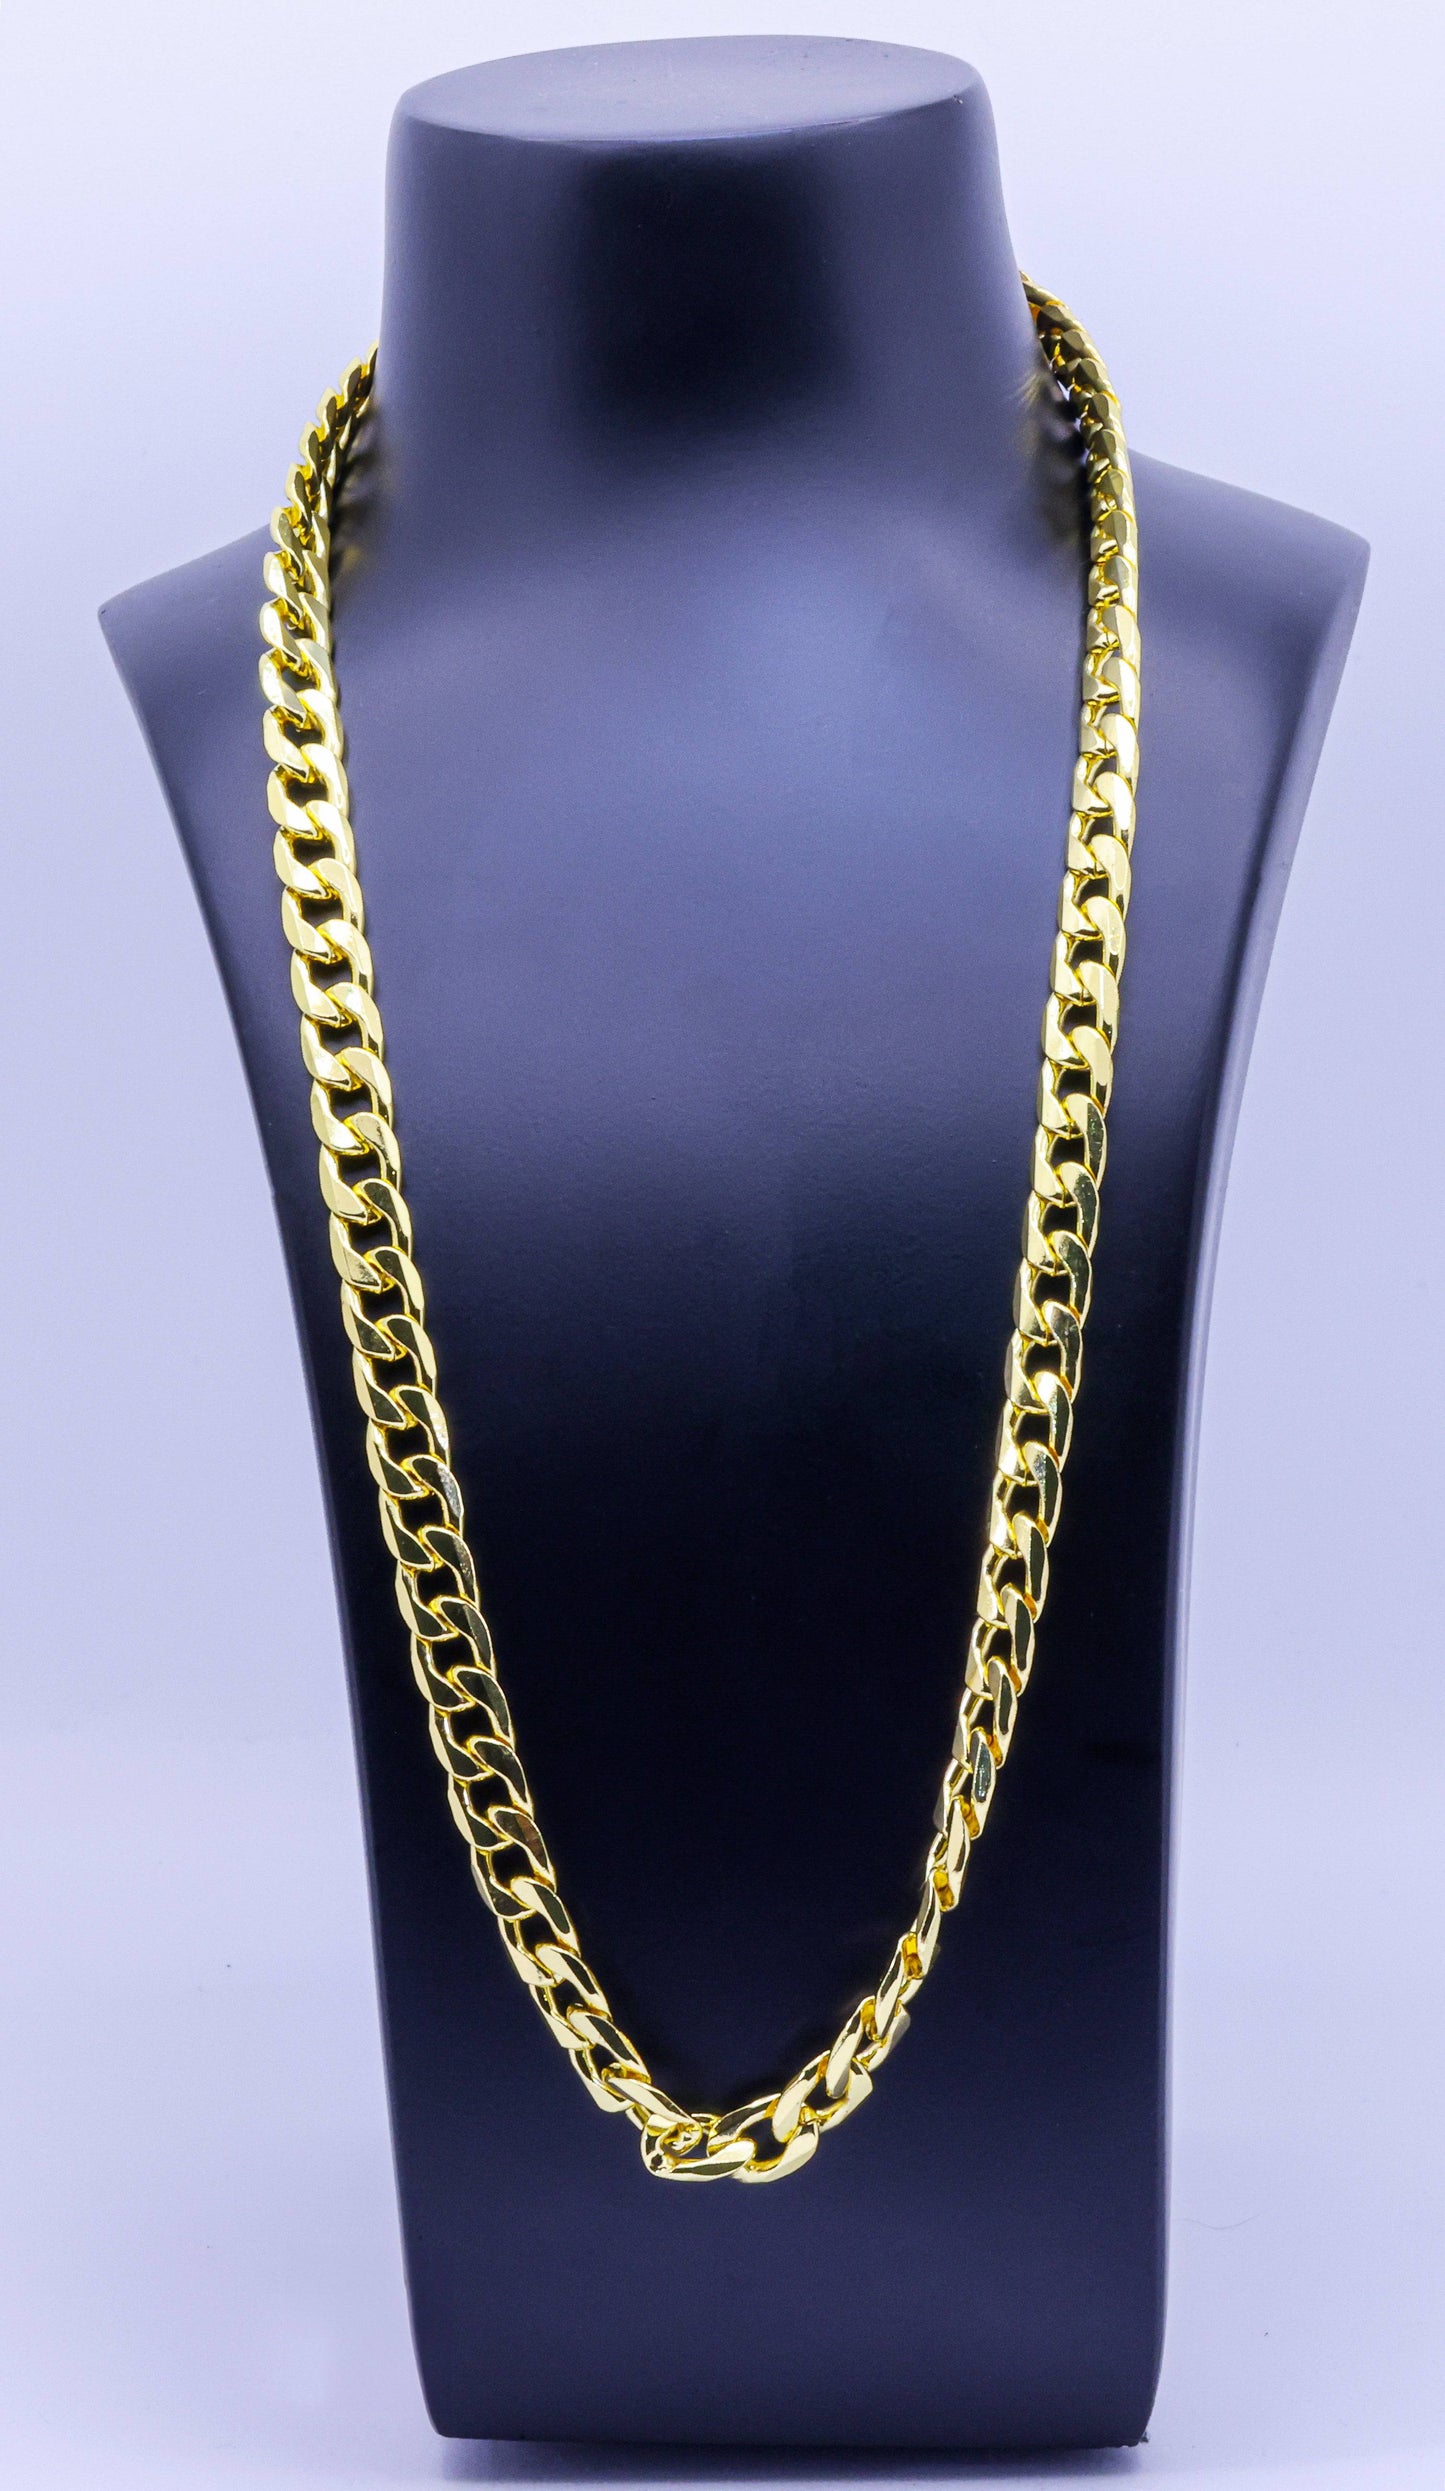 Luxurious Sterling Silver Gold-Plated Curb Chain - Opulent Style and Adjustable Length | 40g, 25cm